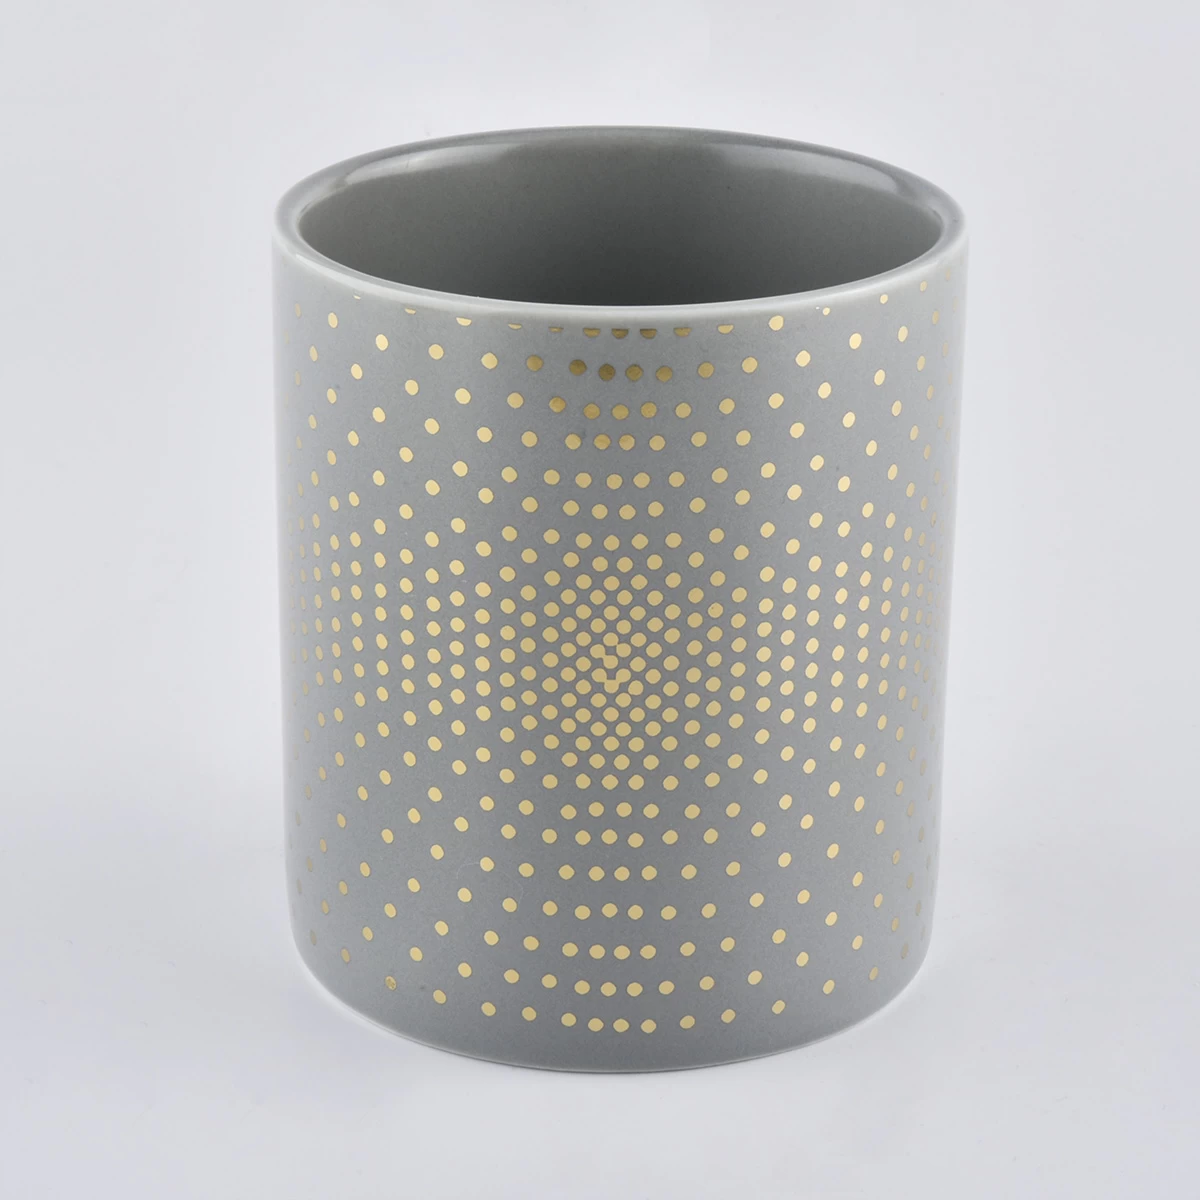 Matte Gray Ceramic Candle Vessels With Custom Pattern